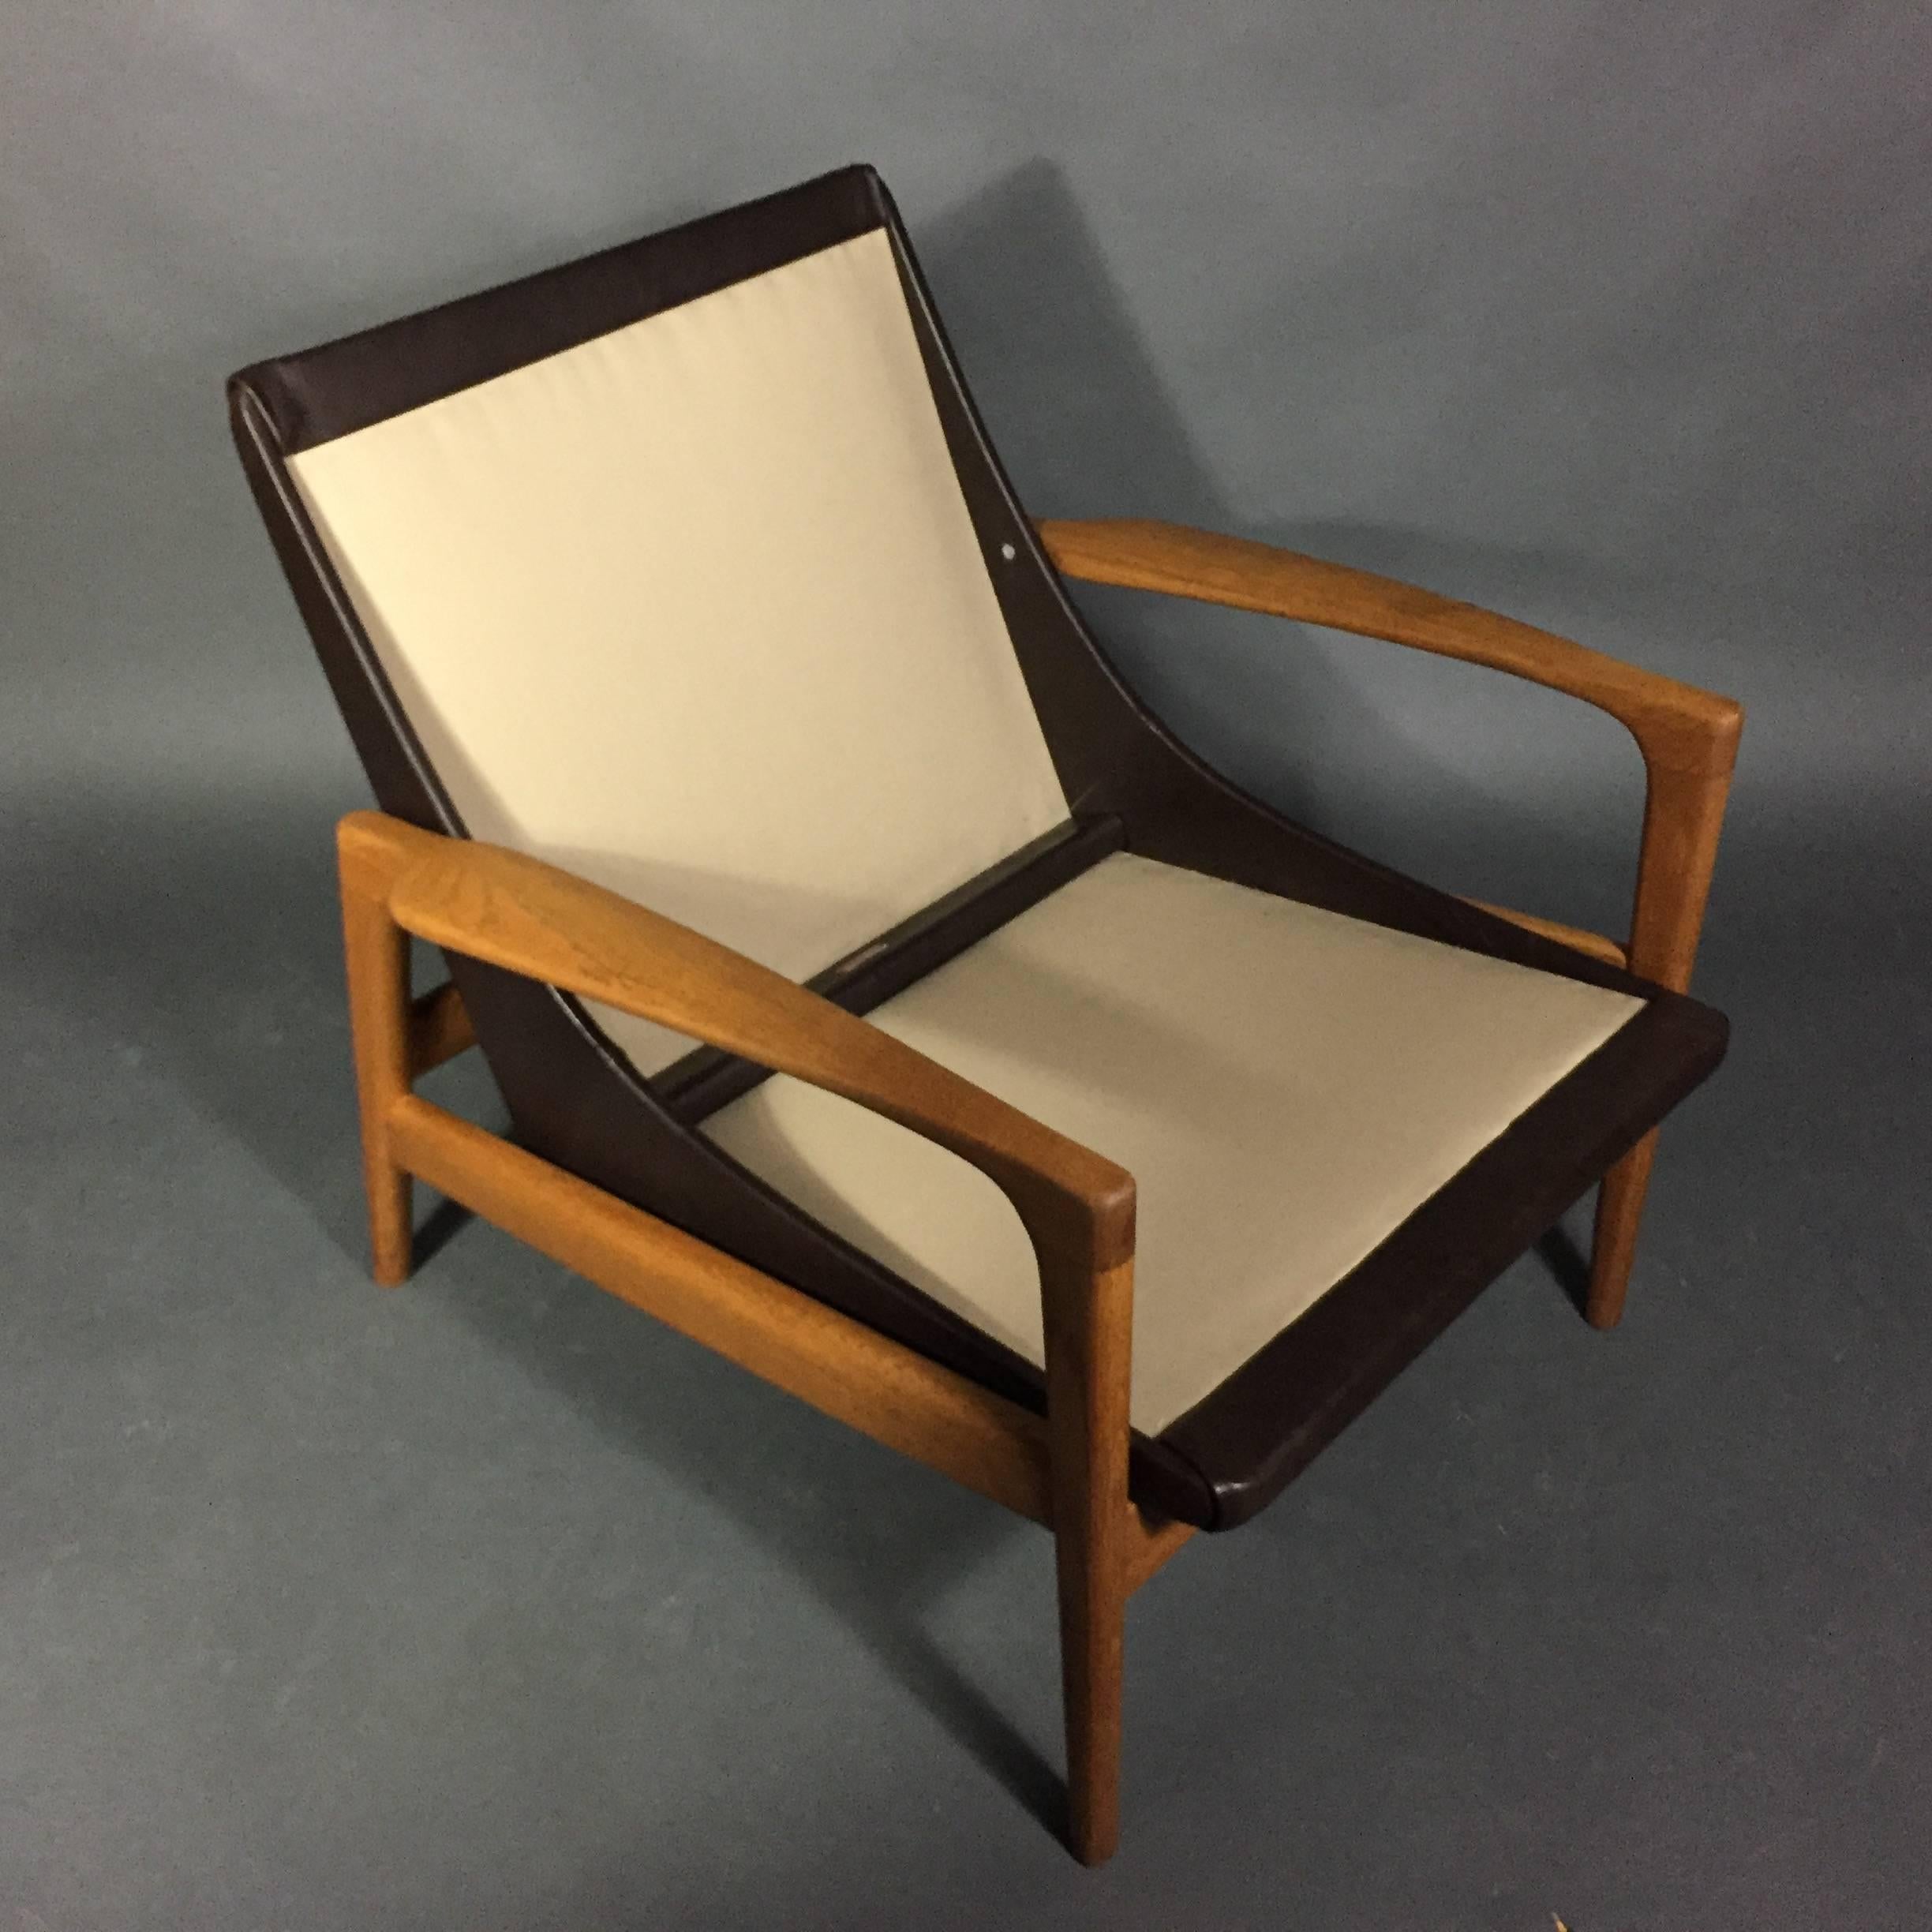 1950s Ib Kofod-Larsen Attributed Lounge Chair, AB Trensums, Sweden For Sale 6